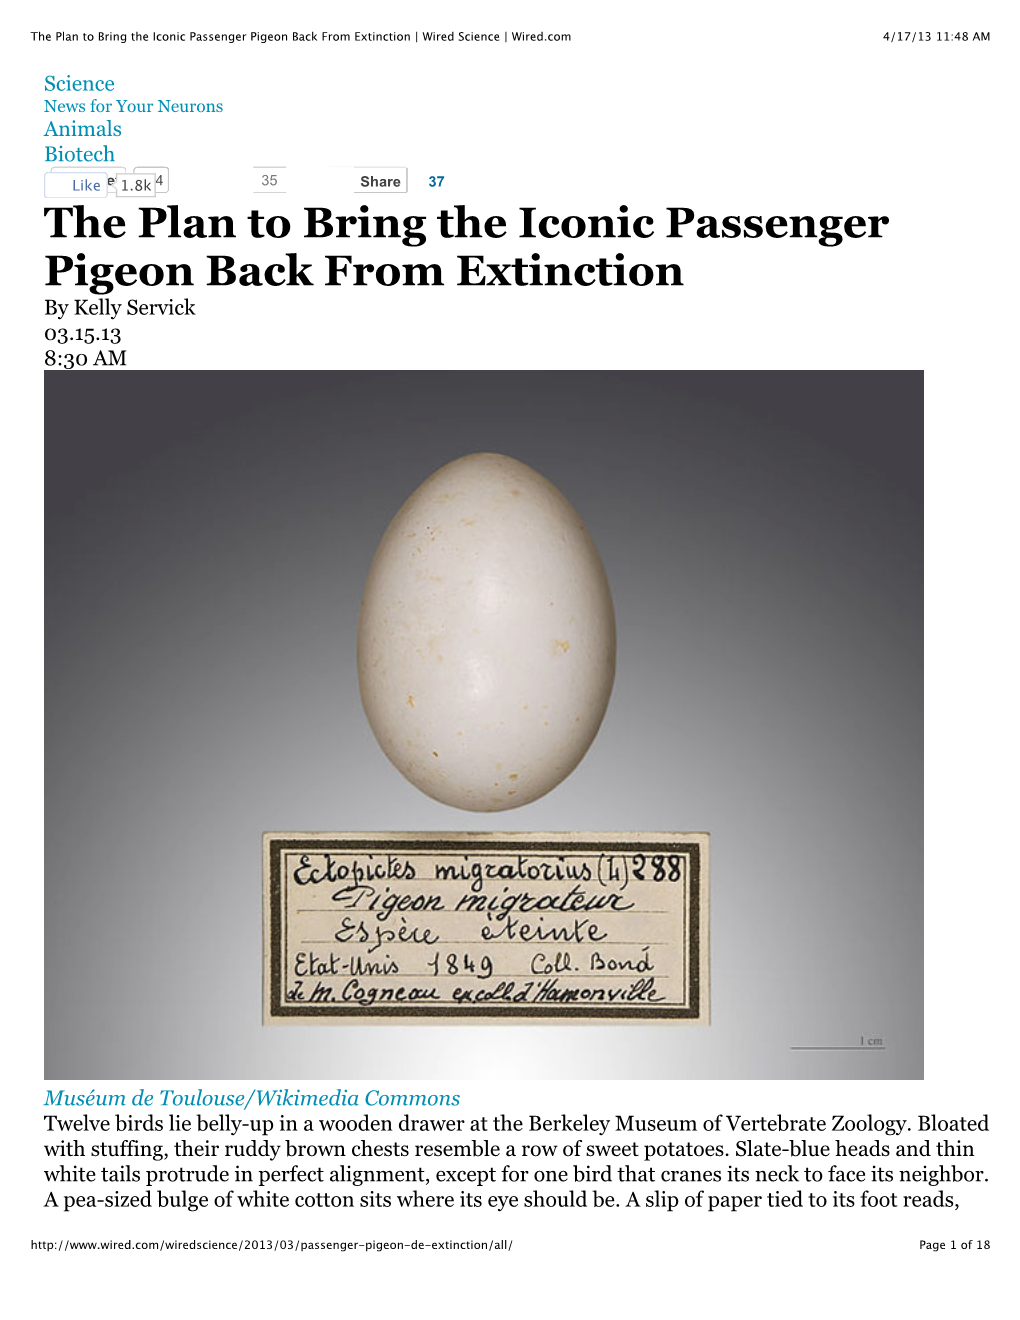 The Plan to Bring the Iconic Passenger Pigeon Back from Extinction | Wired Science | Wired.Com 4/17/13 11:48 AM